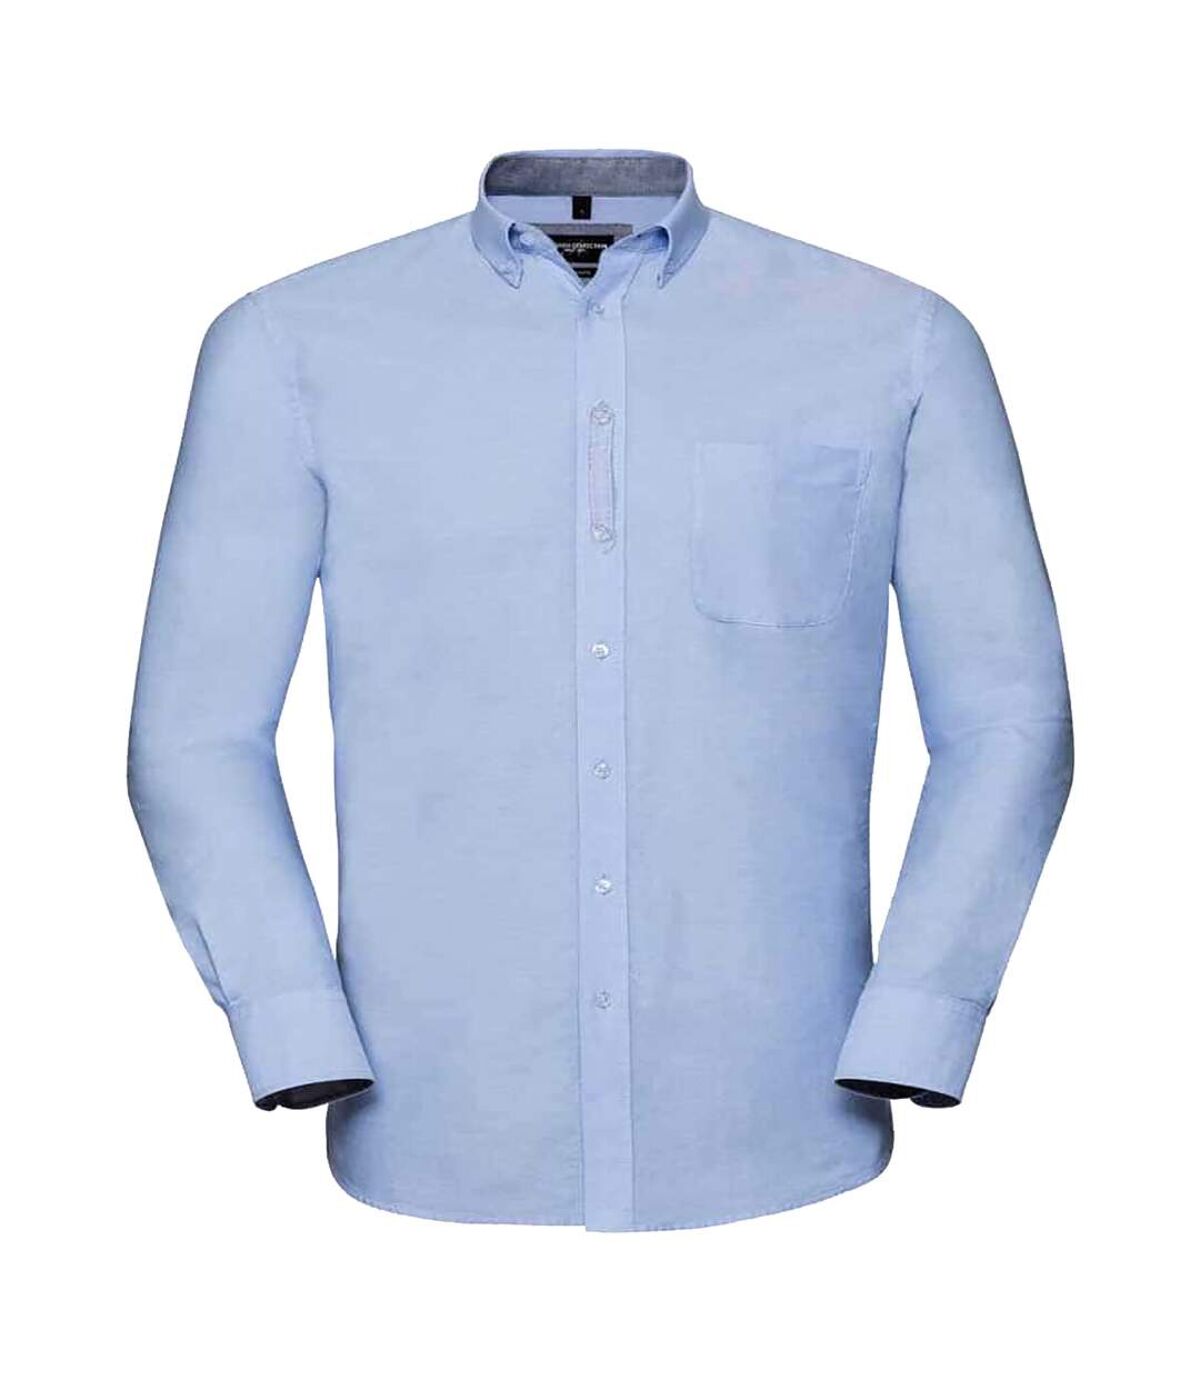 Russell Collection Chemise Oxford à manches longues pour hommes (Bleu Oxford/Navy Oxford) - UTRW7047